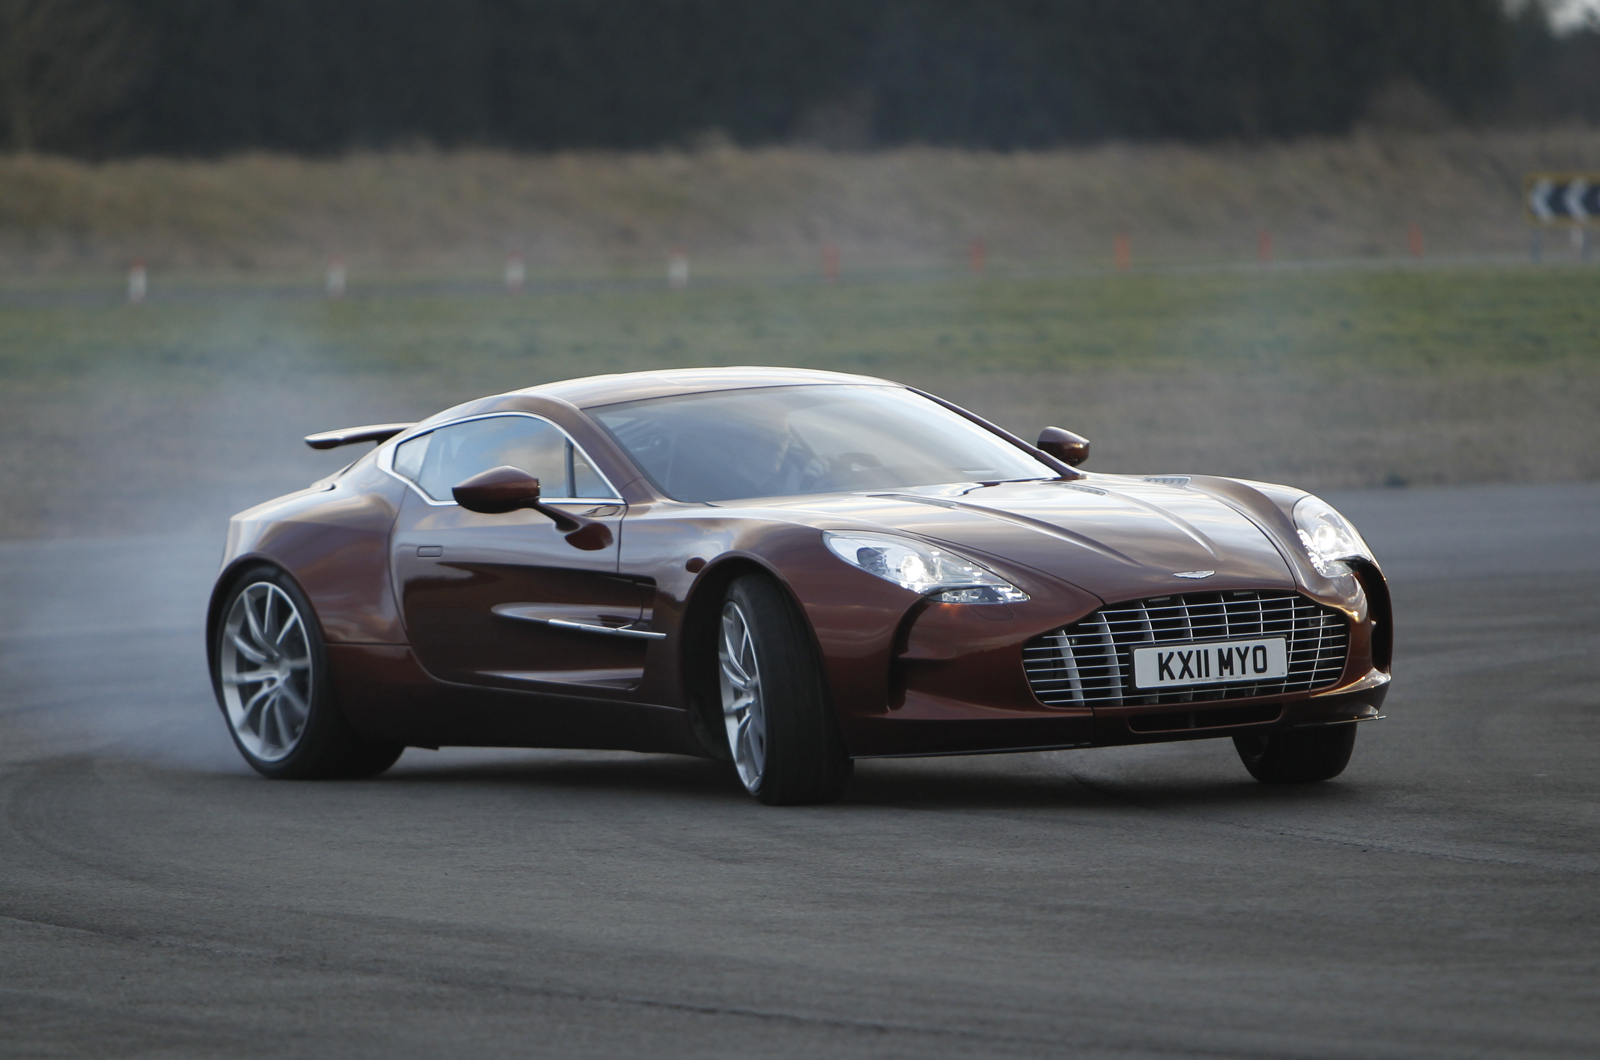 <p>Given its rarity and <strong>£1.4 million</strong> price tag when new, it’s understandable Aston Martin went all out with the One-77 and its V12 engine. The engine mounts are machined from solid <strong>billets</strong> of aluminum and the 7.3-liter motor itself was handed over to <strong>Cosworth</strong> to develop and build. Their brief was to create a motor with at least 700bhp and an all-up weight 10 per cent lower than the standard V12 it was based on.</p><p>Cosworth came up trumps with <strong>760 hp</strong> and shed 15 per cent of the weight by ditching the standard unit’s shrunk-in cylinder liners in favor of a spray-on coating for the bores. Compared to a DBS, the One-77’s engine had variable valve timing and is also positioned further back and a whole <strong>4 inches </strong>lower in the chassis for better weight distribution and handling. It also gained a rear-mounted gearbox for the same reason.</p>